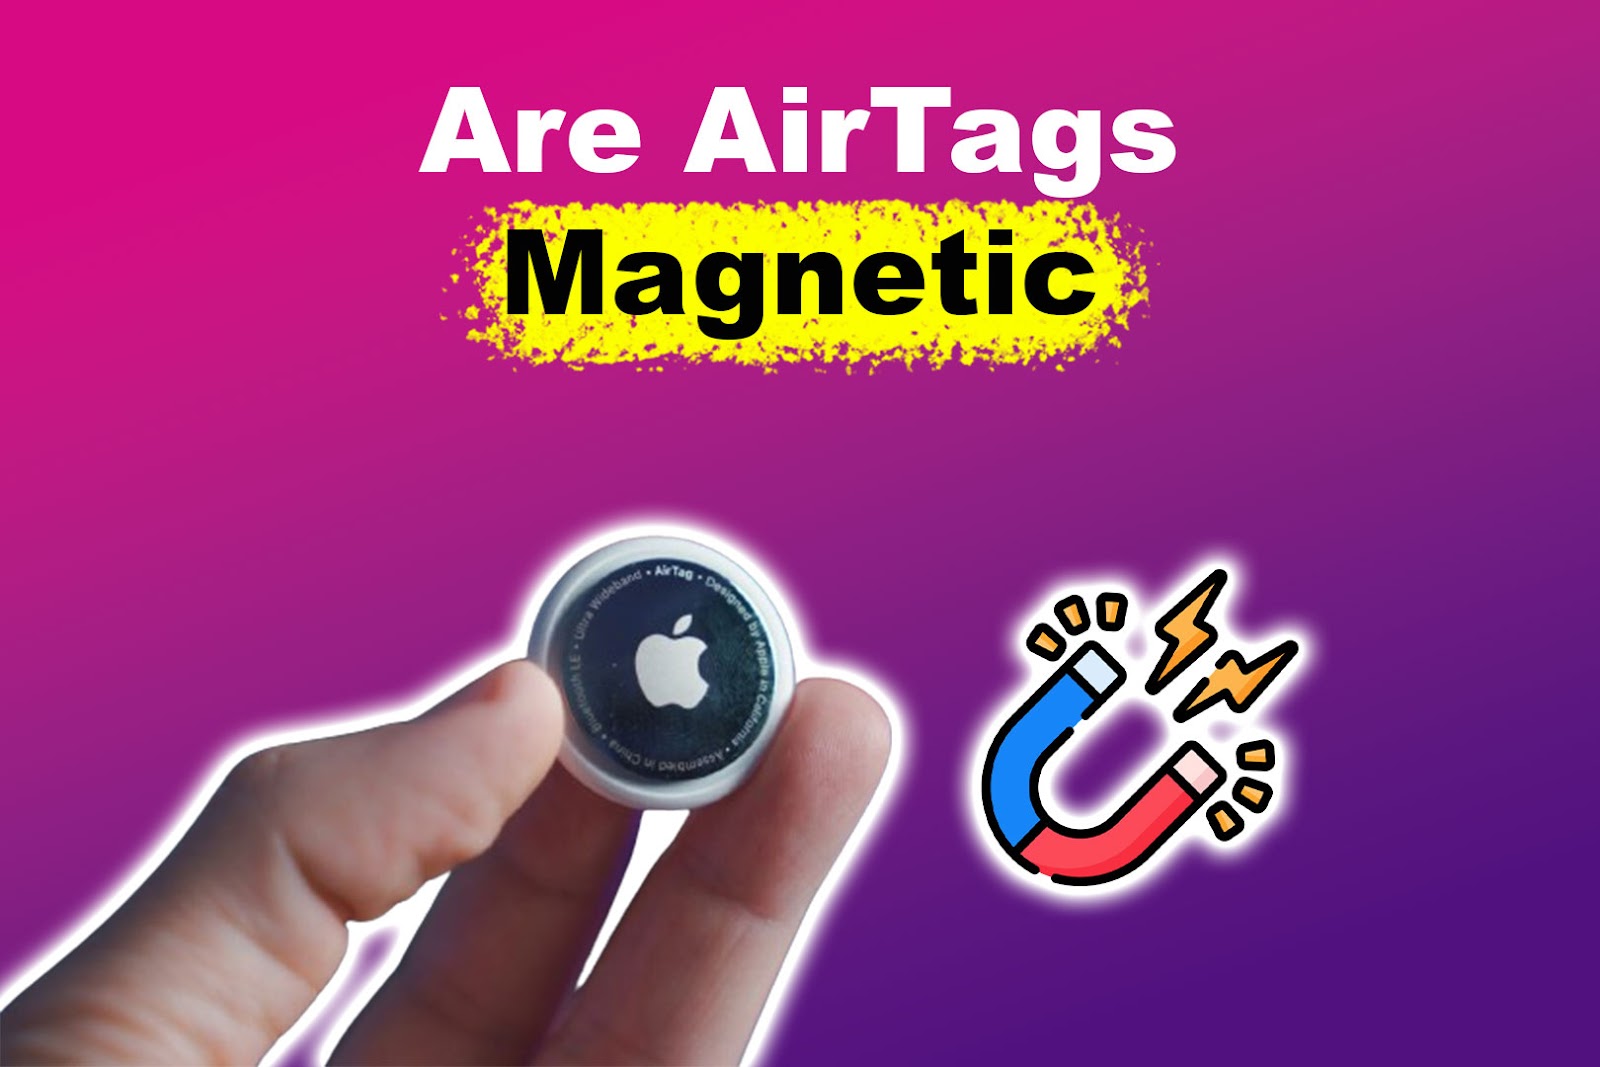 Are AirTags Magnetic